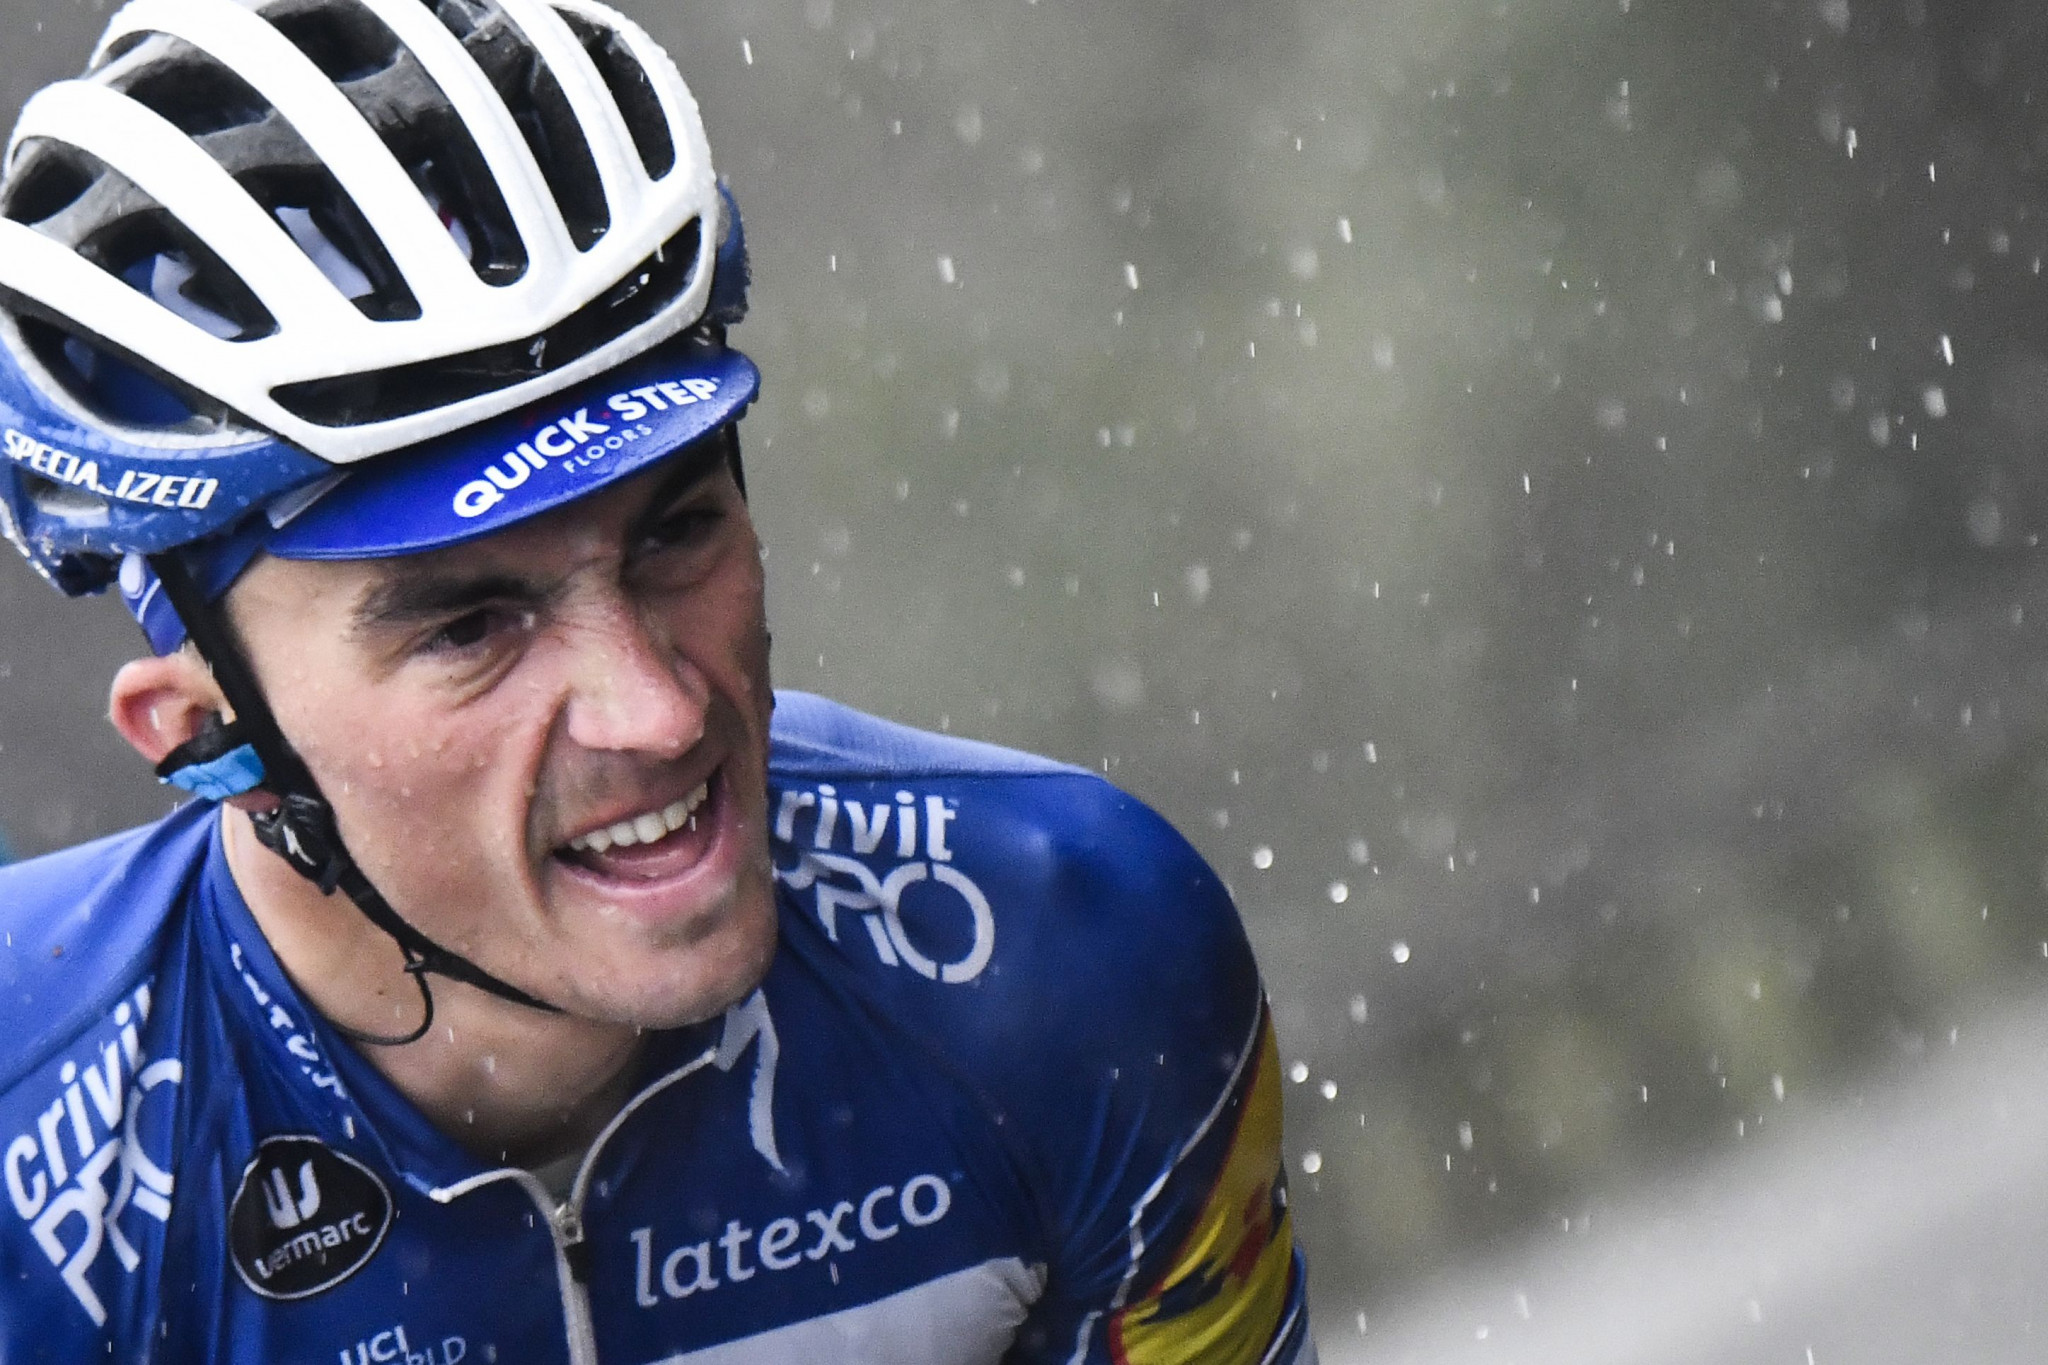 Alaphilippe sprints to opening stage win at Tour of the Basque Country